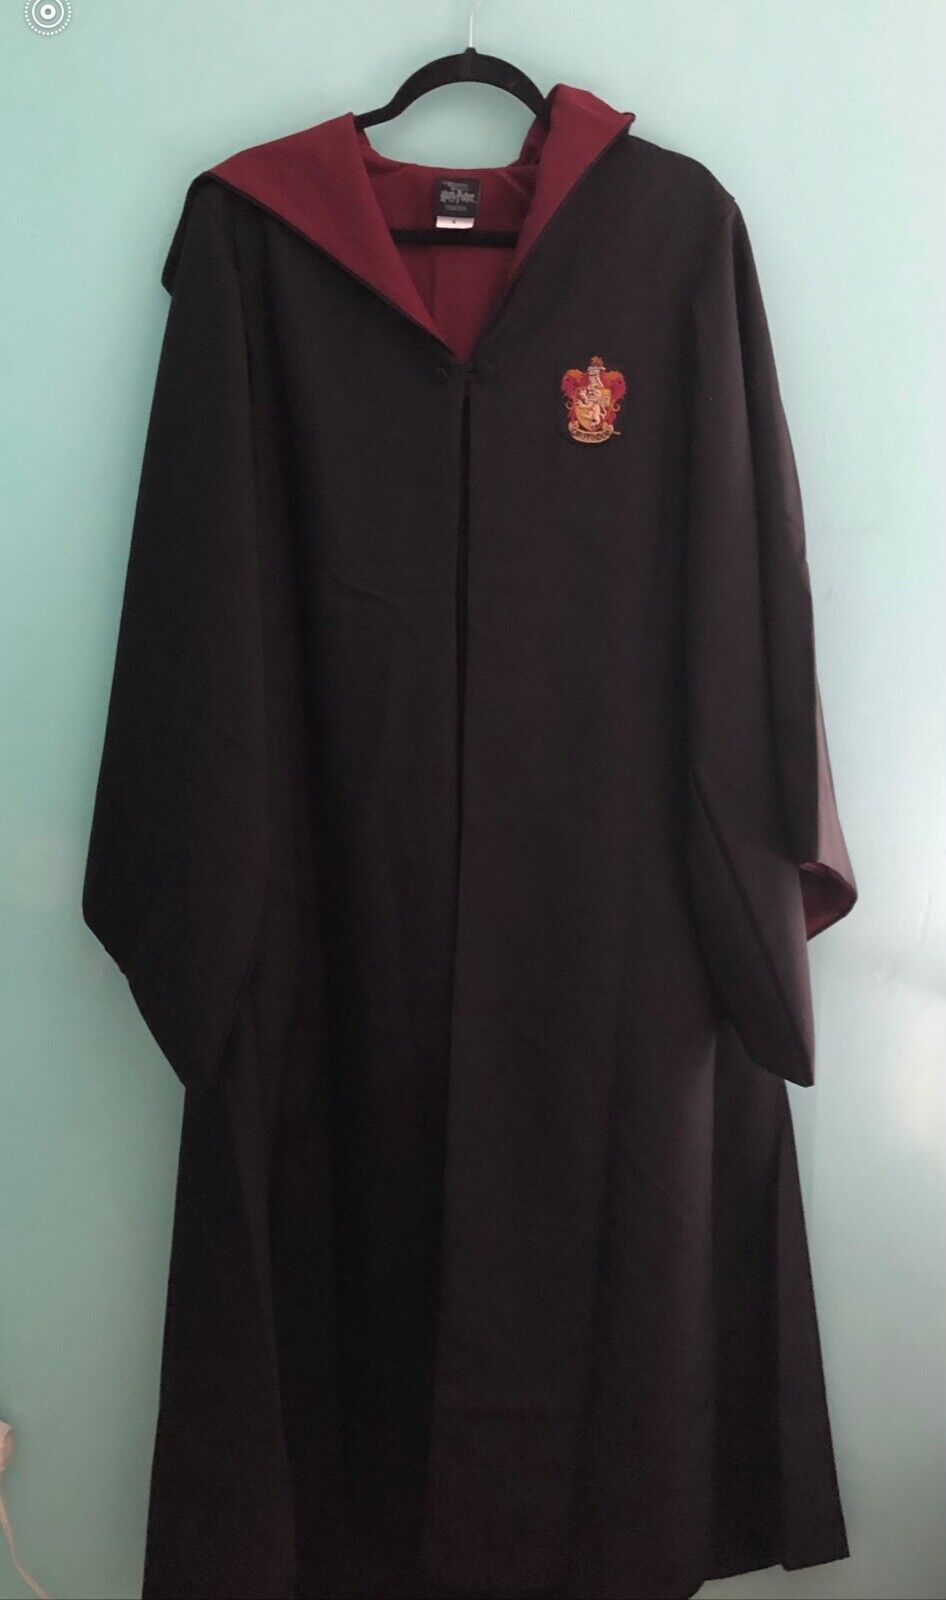 Official Harry Potter Gryffindor robe and wand UNIVERSAL STUDIOS